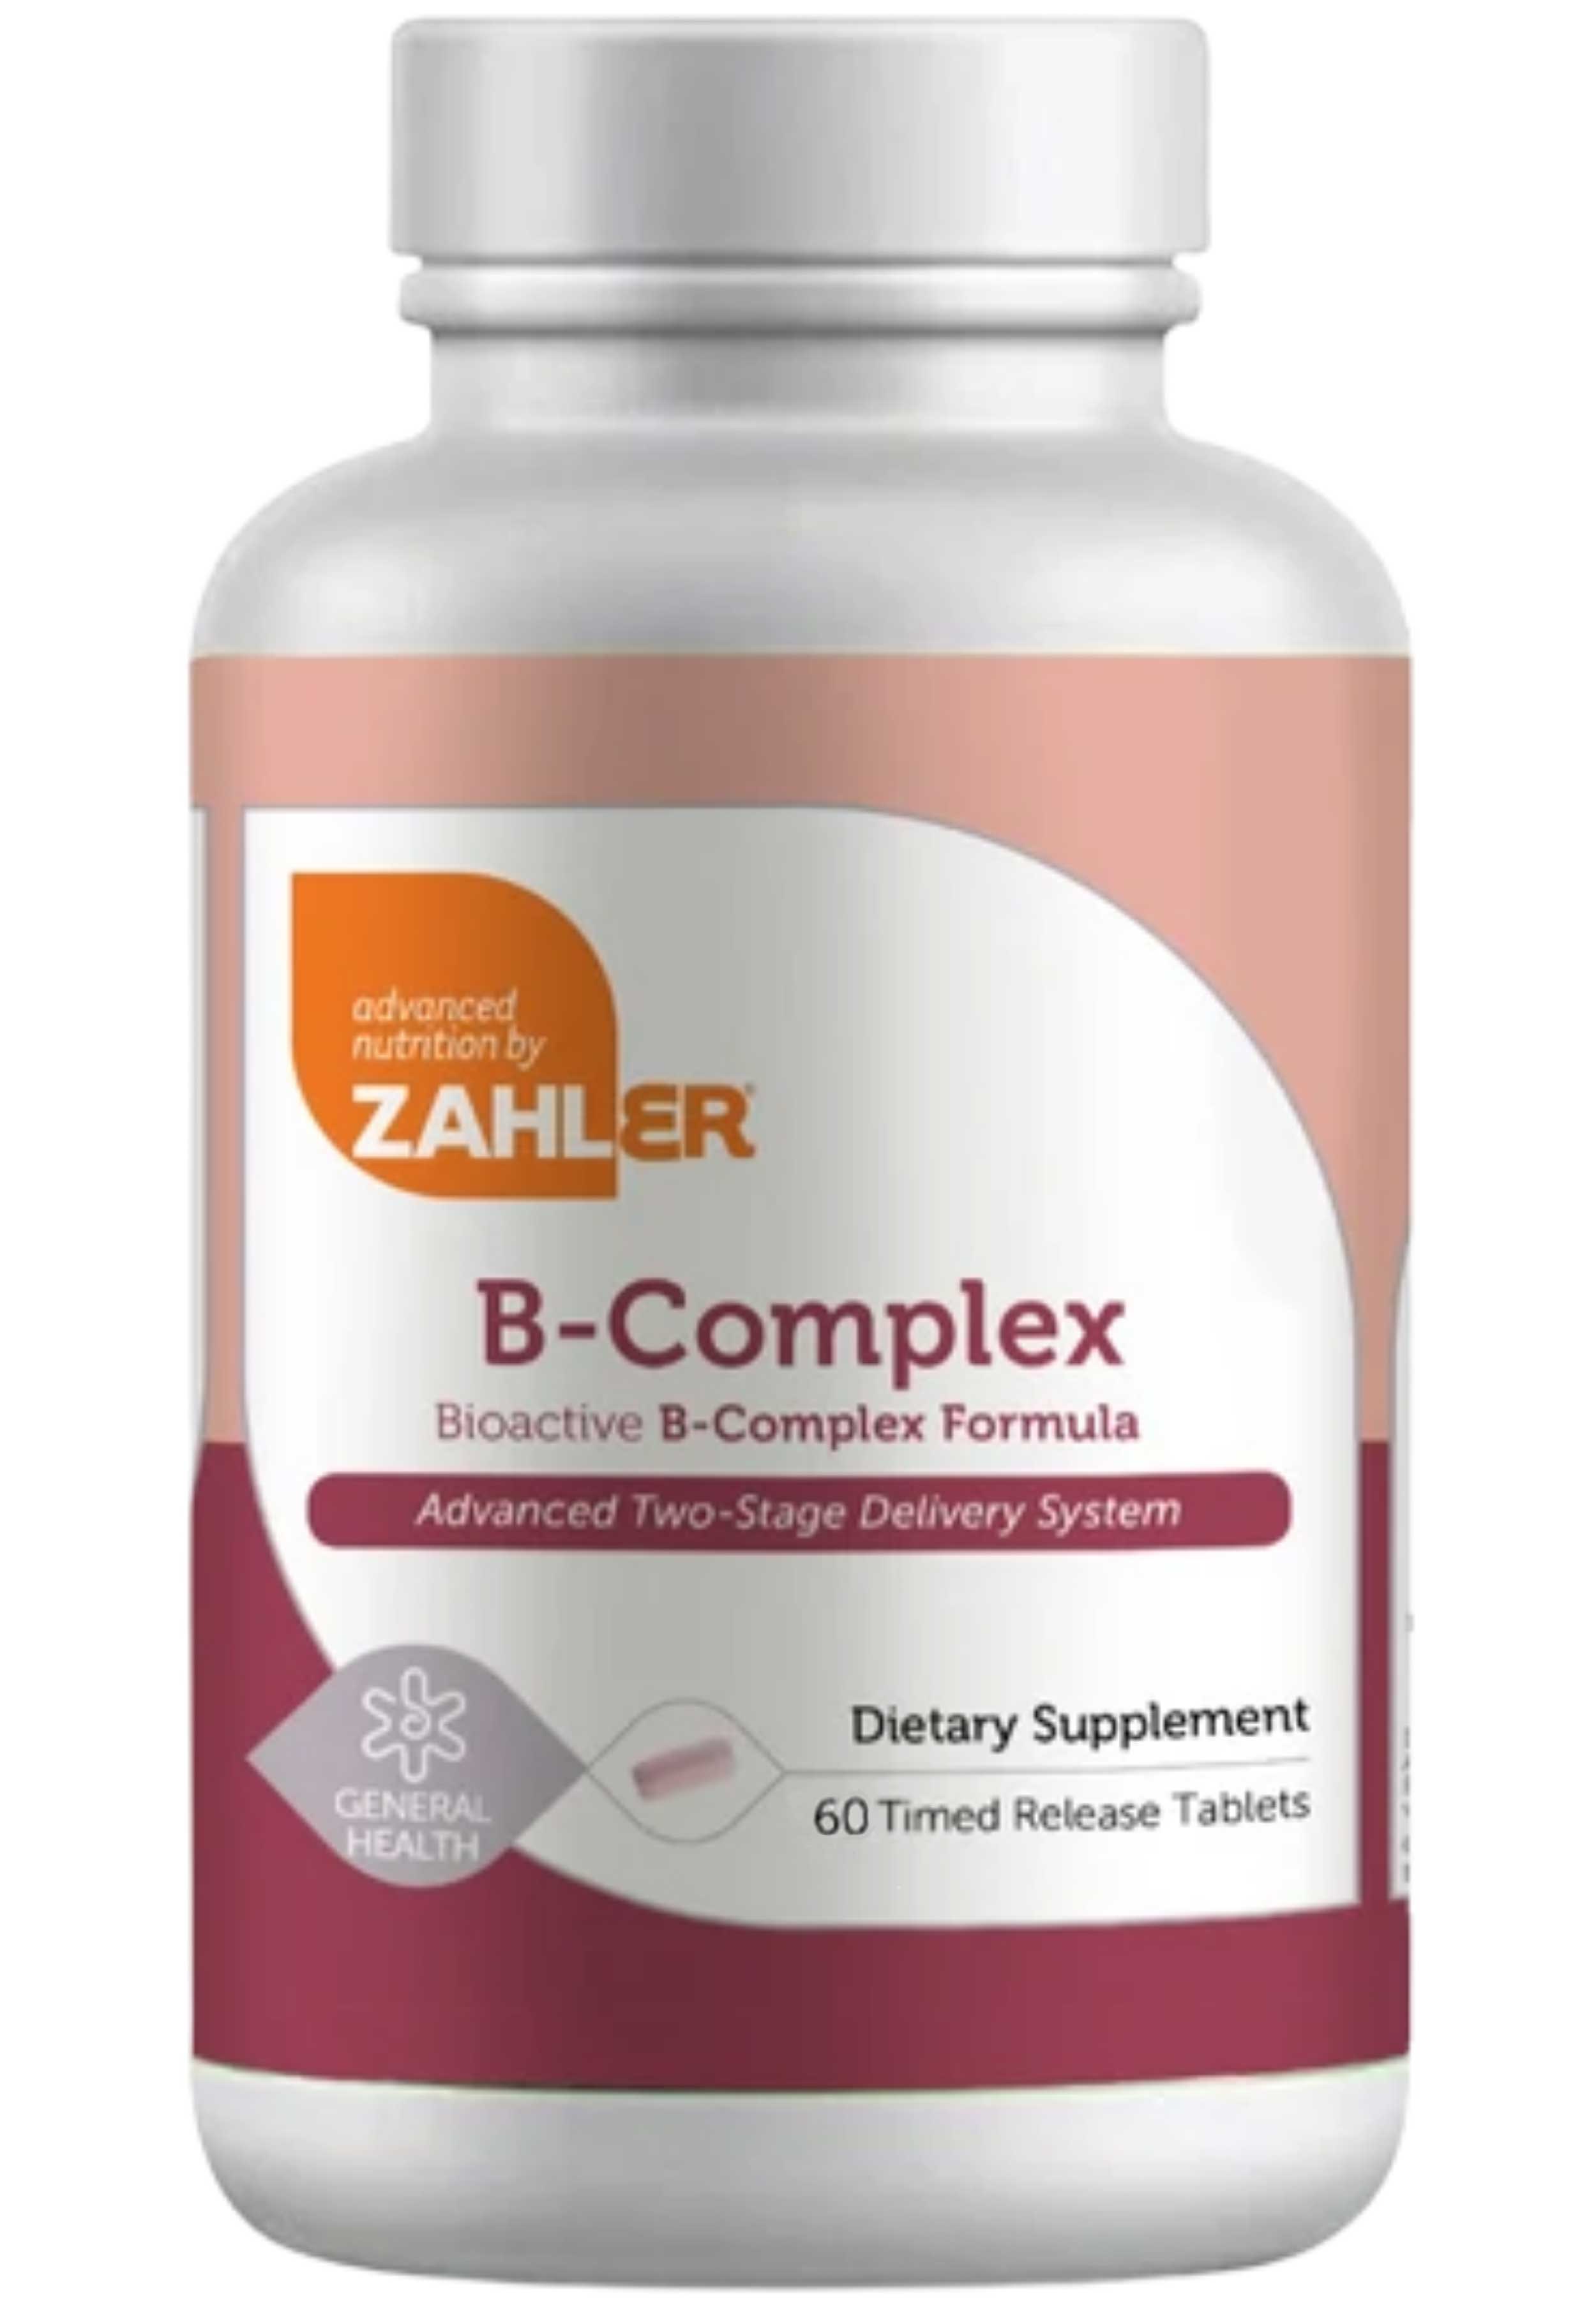 Advanced Nutrition By Zahler B-Complex